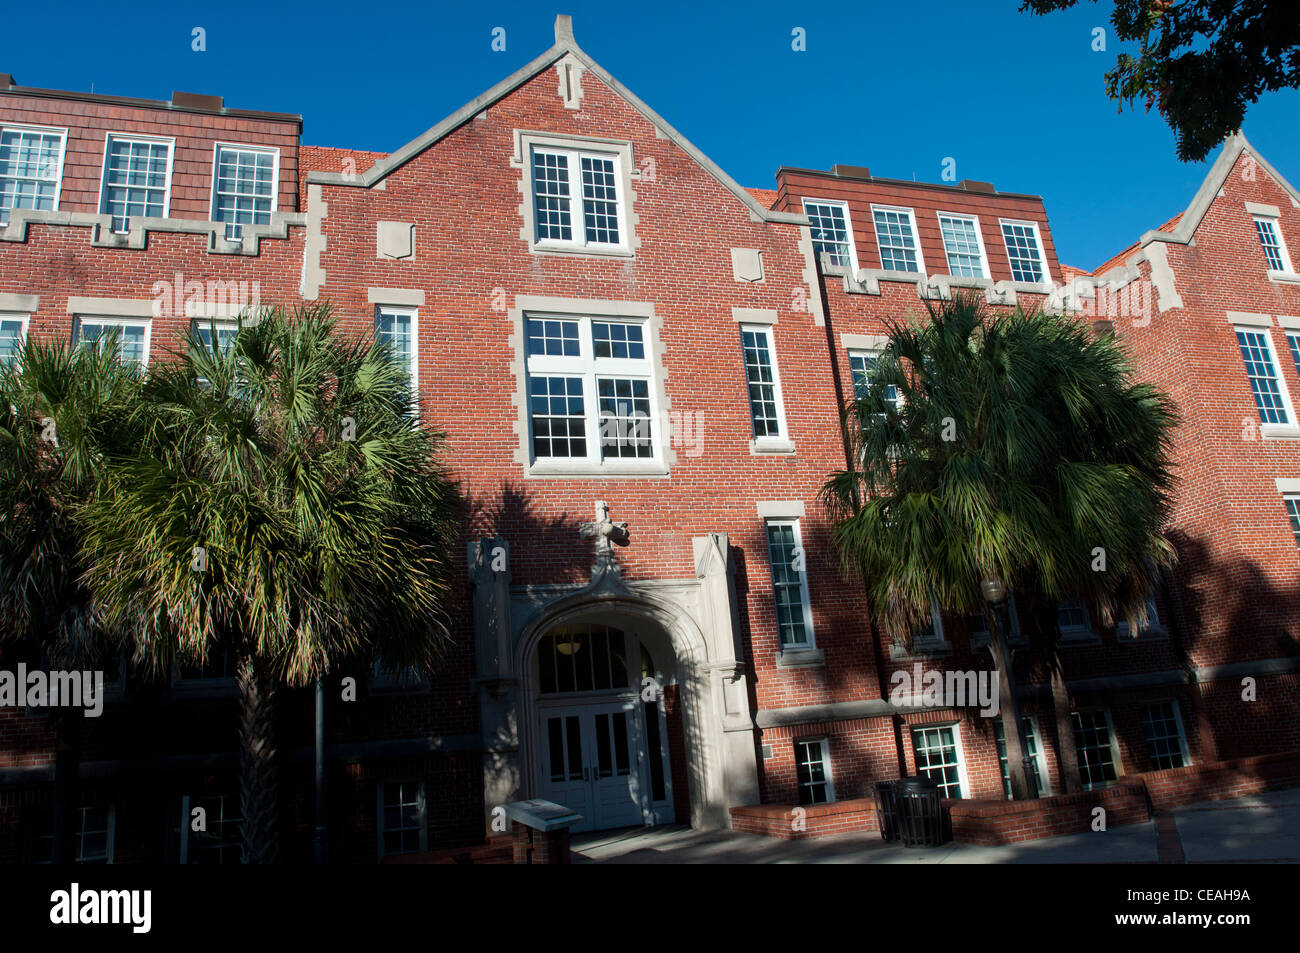 Red brick Anderson Hall, Political Science and Religion, University of Florida, Gainesville, Florida, USA, United States Stock Photo